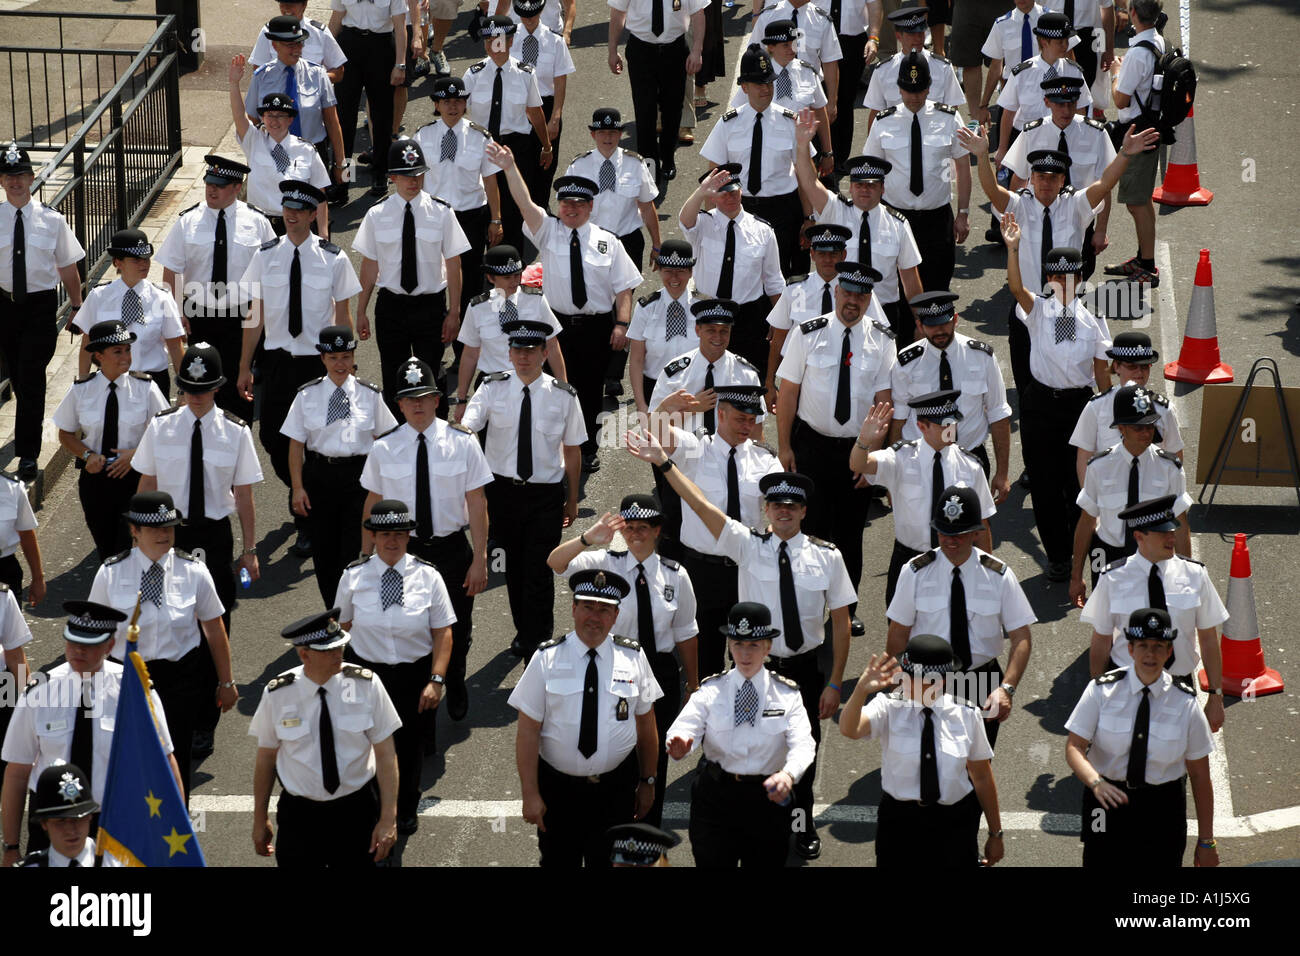 Police march in Europride gay march through London Stock Photo